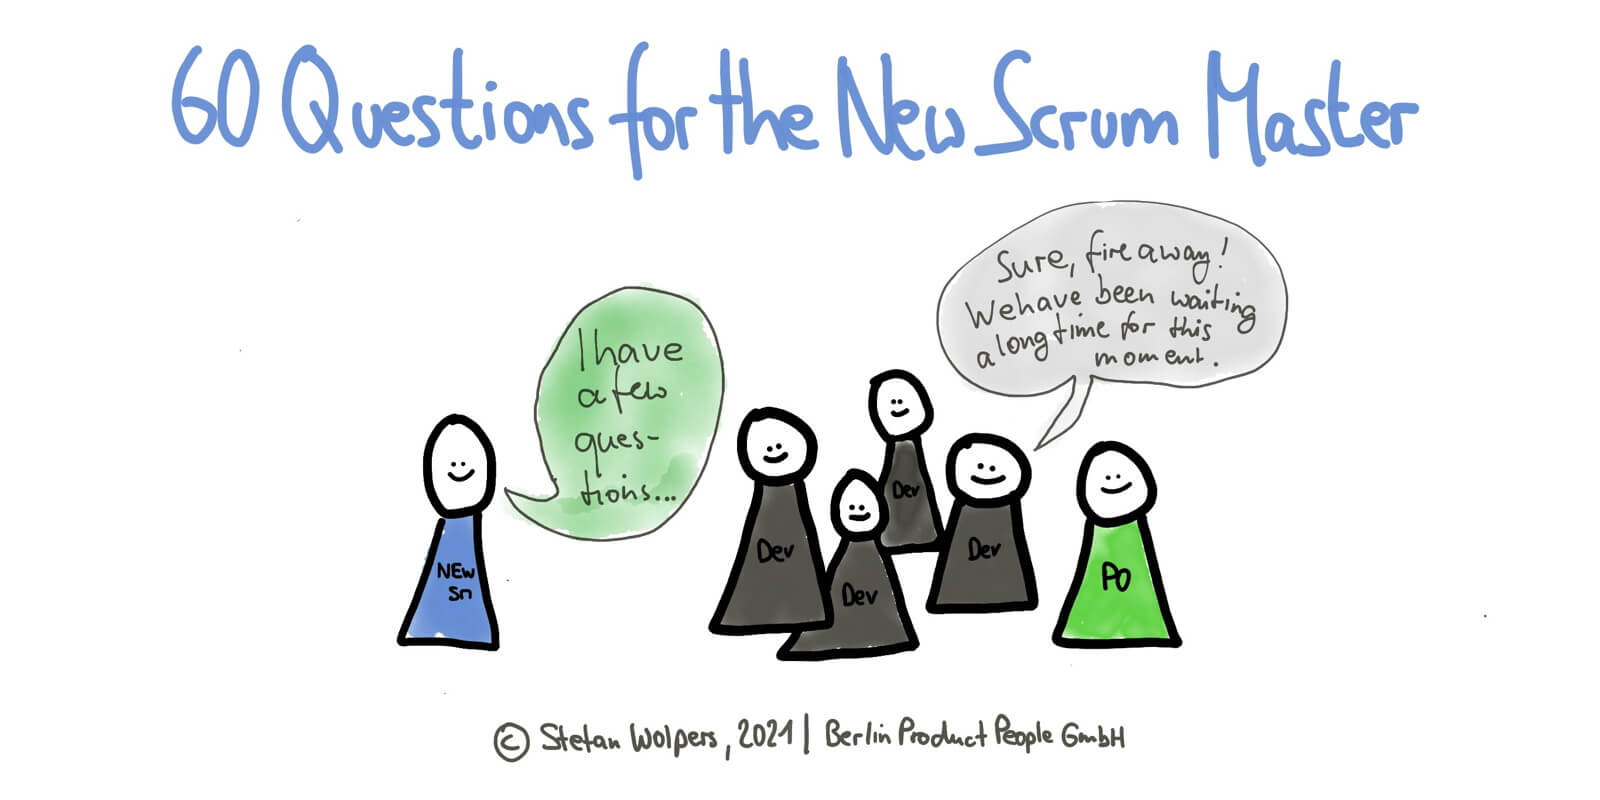 60 Questions for the New Scrum Master — Take them to the Team! Berlin Product People GmbH